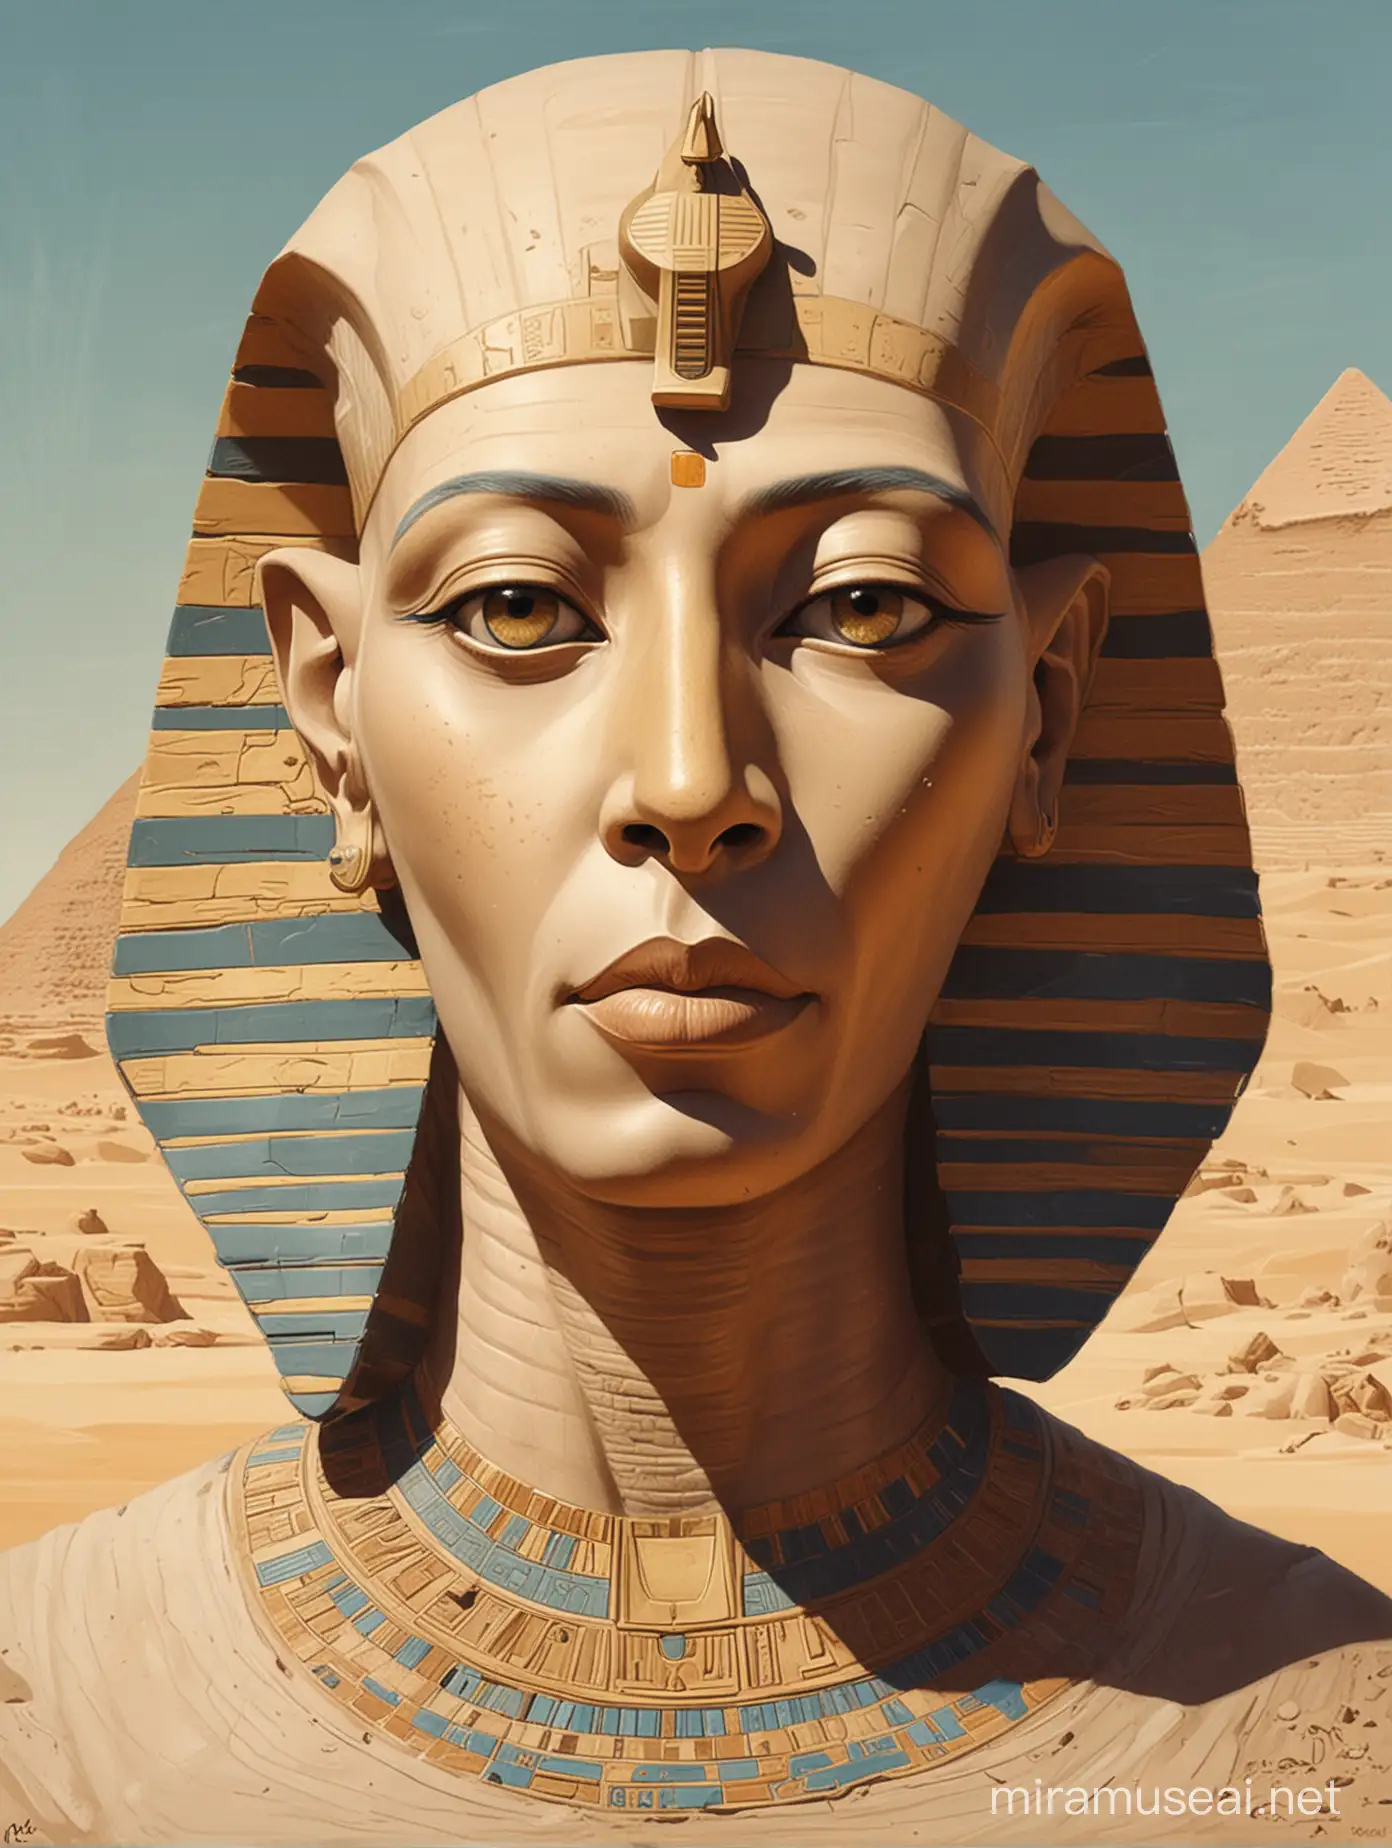 Futuristic Caricature of the Egyptian Sphinx 1970s Subconscious Imagery